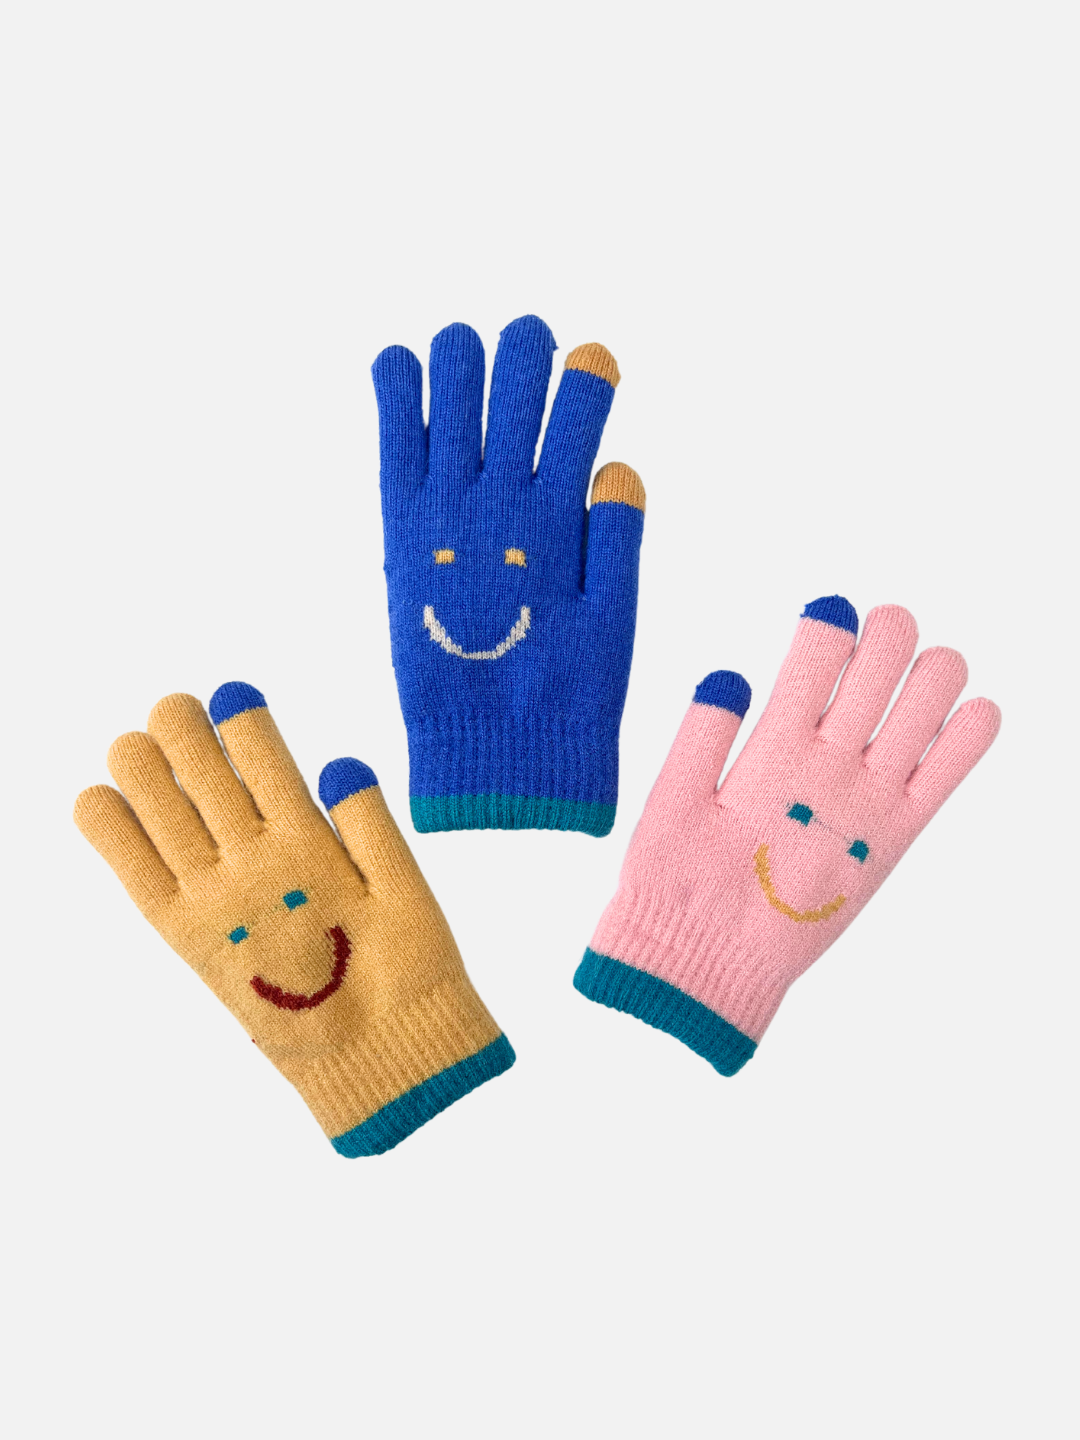 All three of kids' smile gloves.